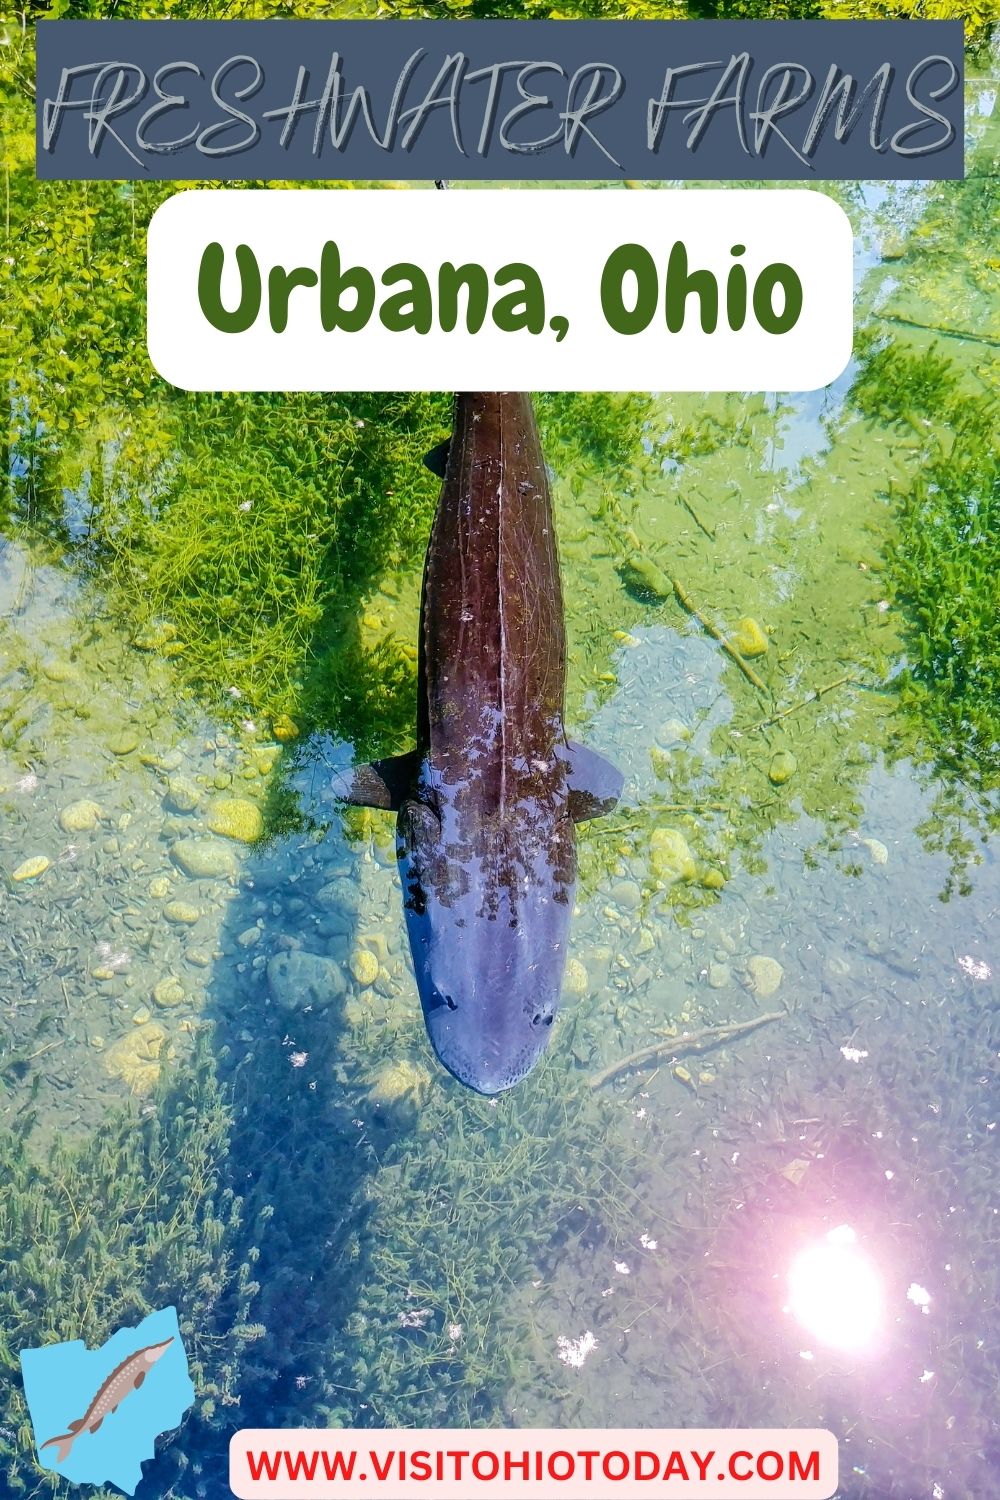 Photo of a sturgeon fish in water. Text overlay says Freshwater Farms Urbana, Ohio